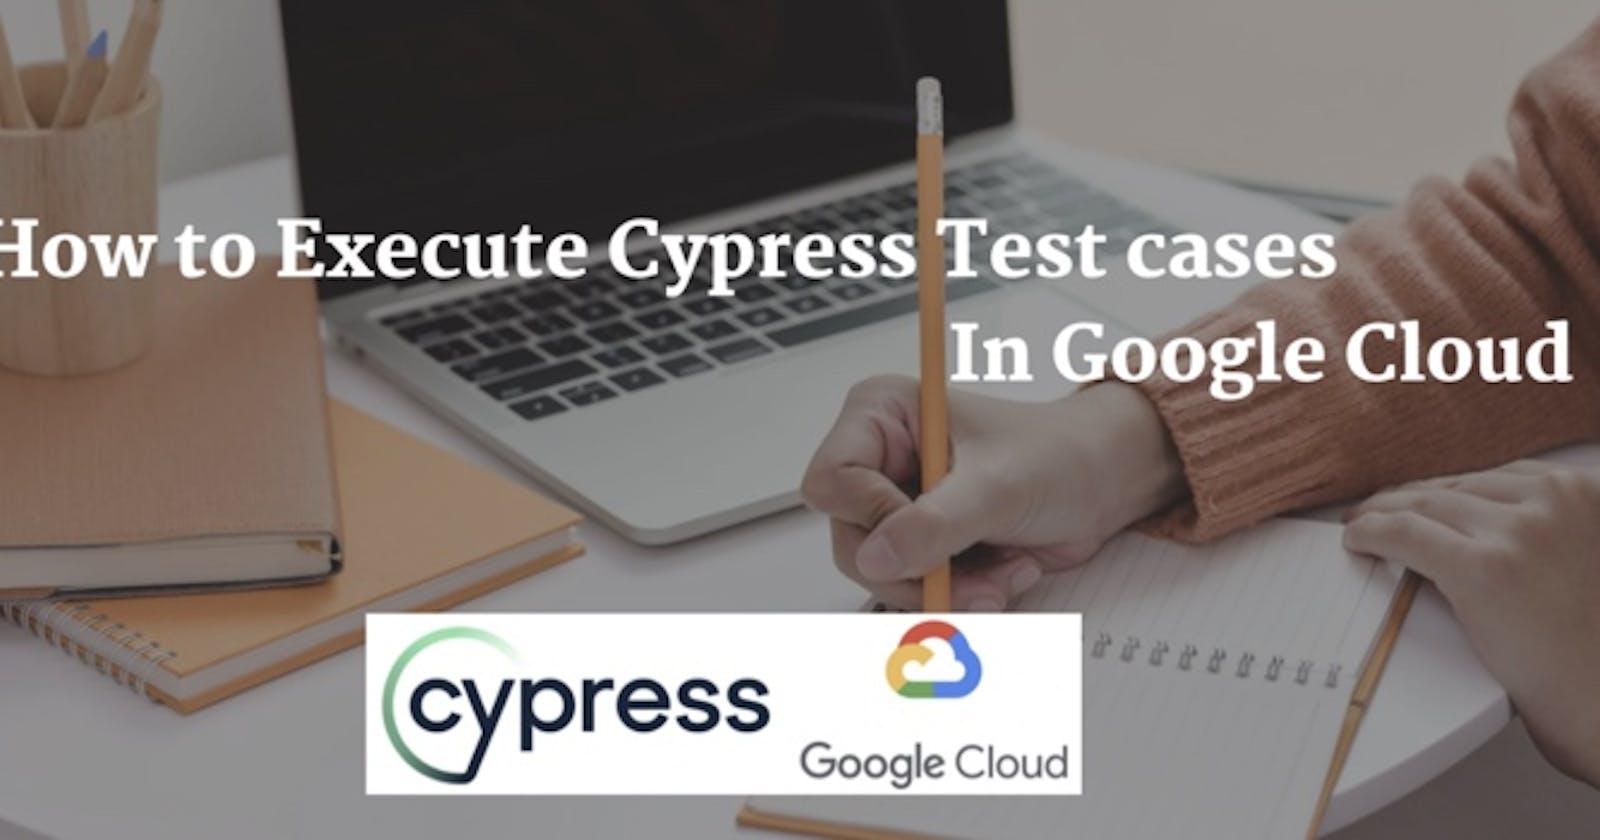 How to Setup And Run Cypress Test Cases in Google Cloud?